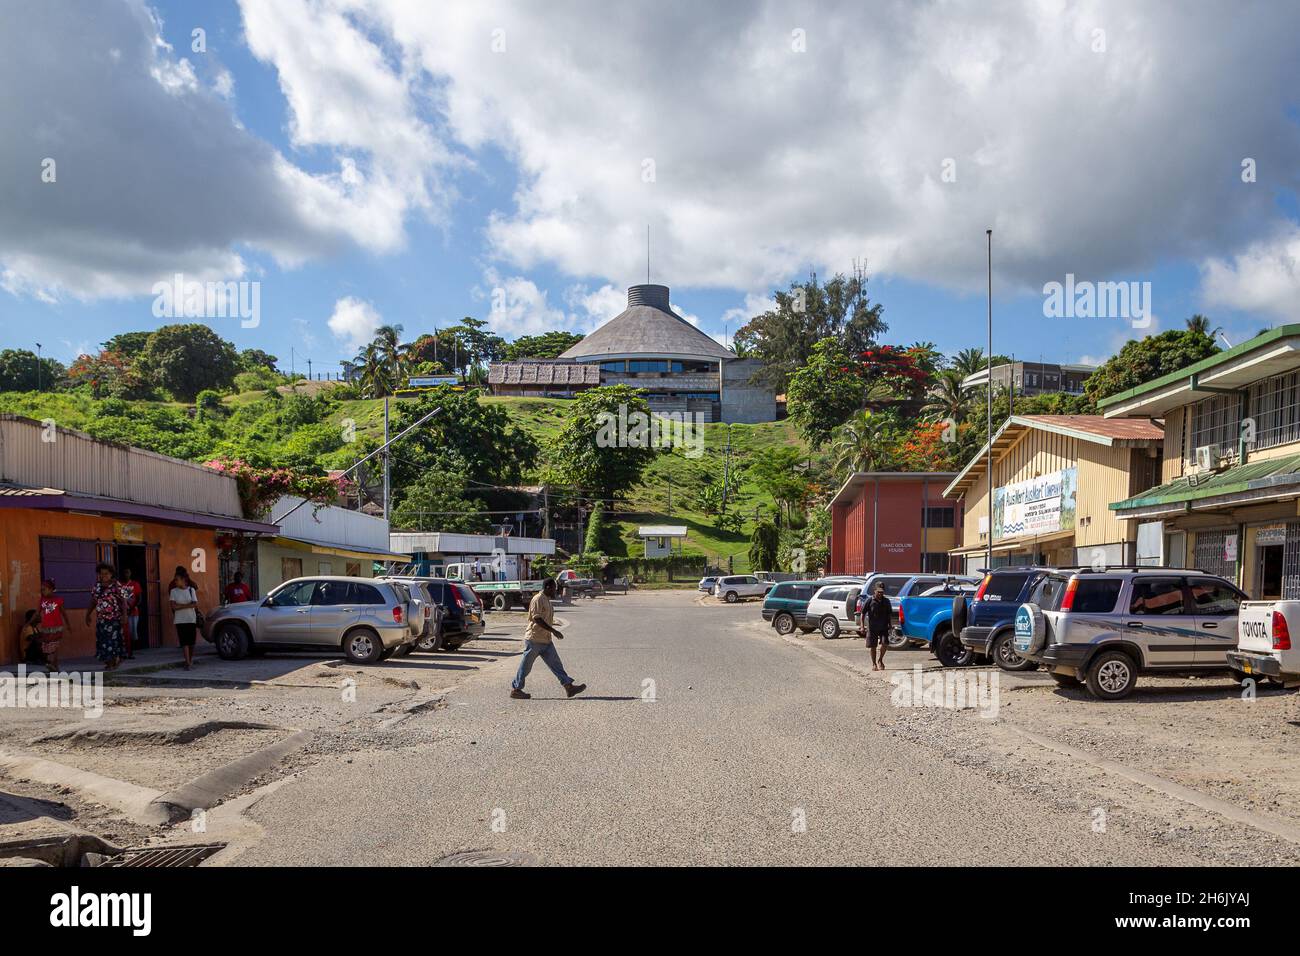 HONIARA, SOLOMON ISLANDS - Jan 13, 2016: View of the Solomon Islands National Parliament Building from central Honiara. Stock Photo